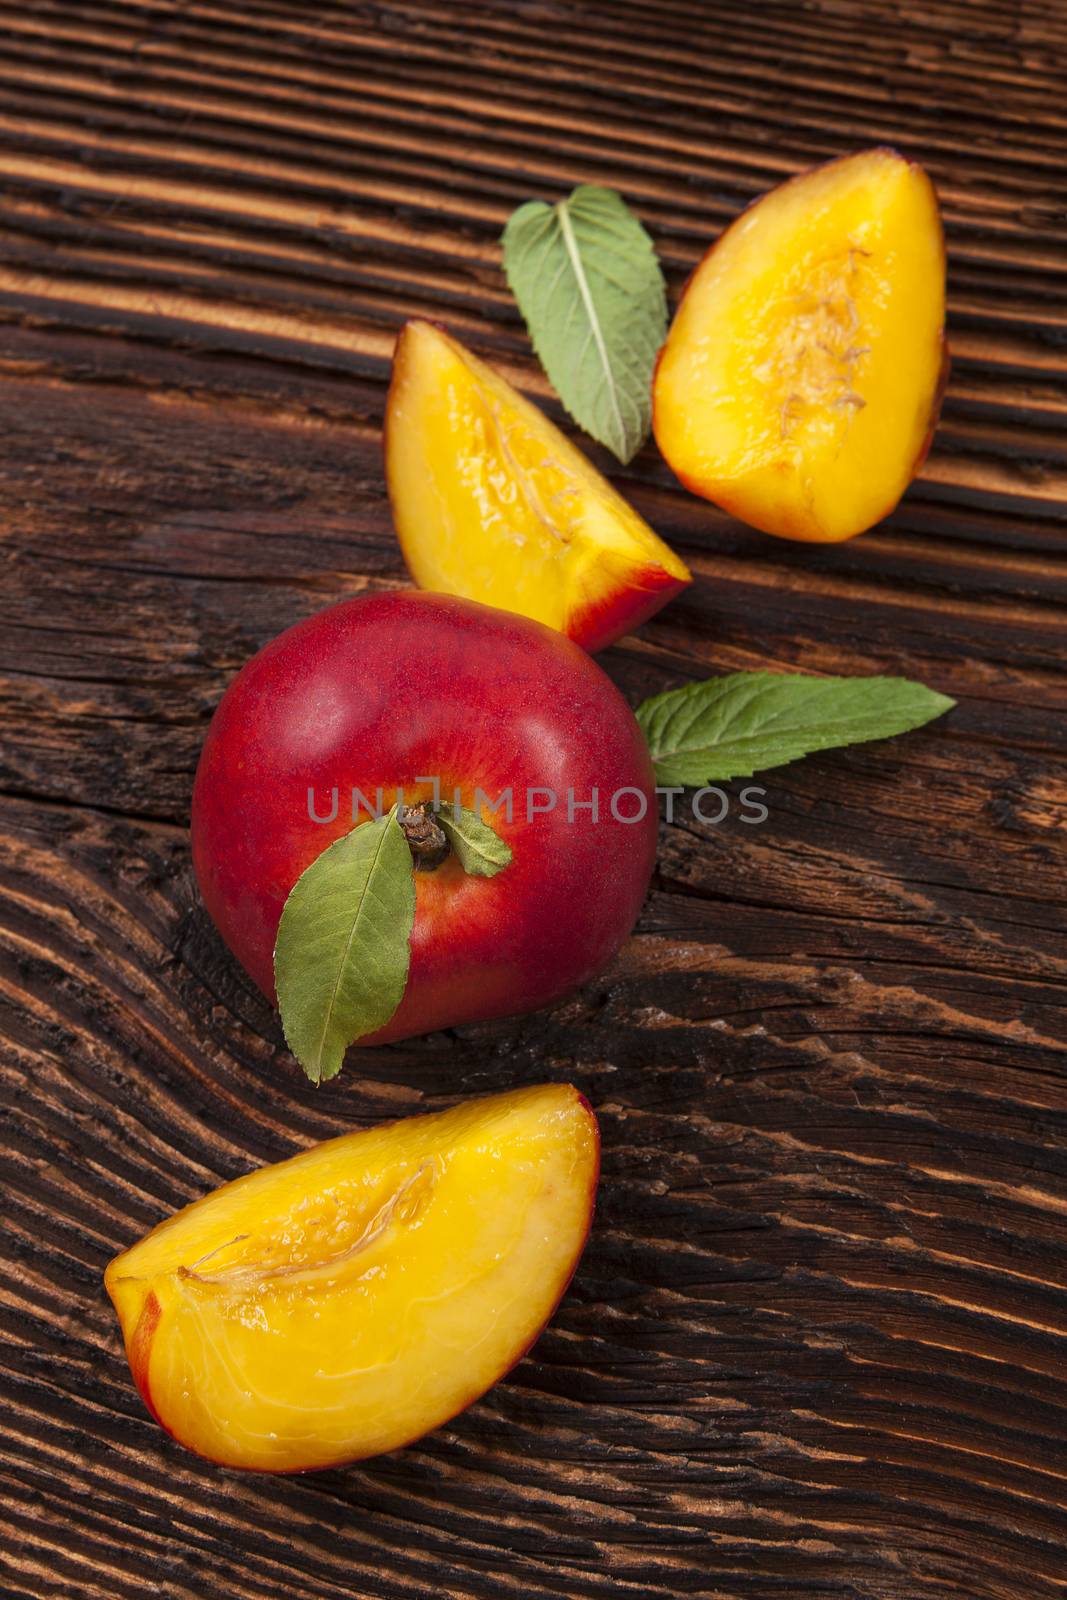 Fresh ripe nectarines background on wooden rustic table. Healthy fresh ripe fruit eating. 